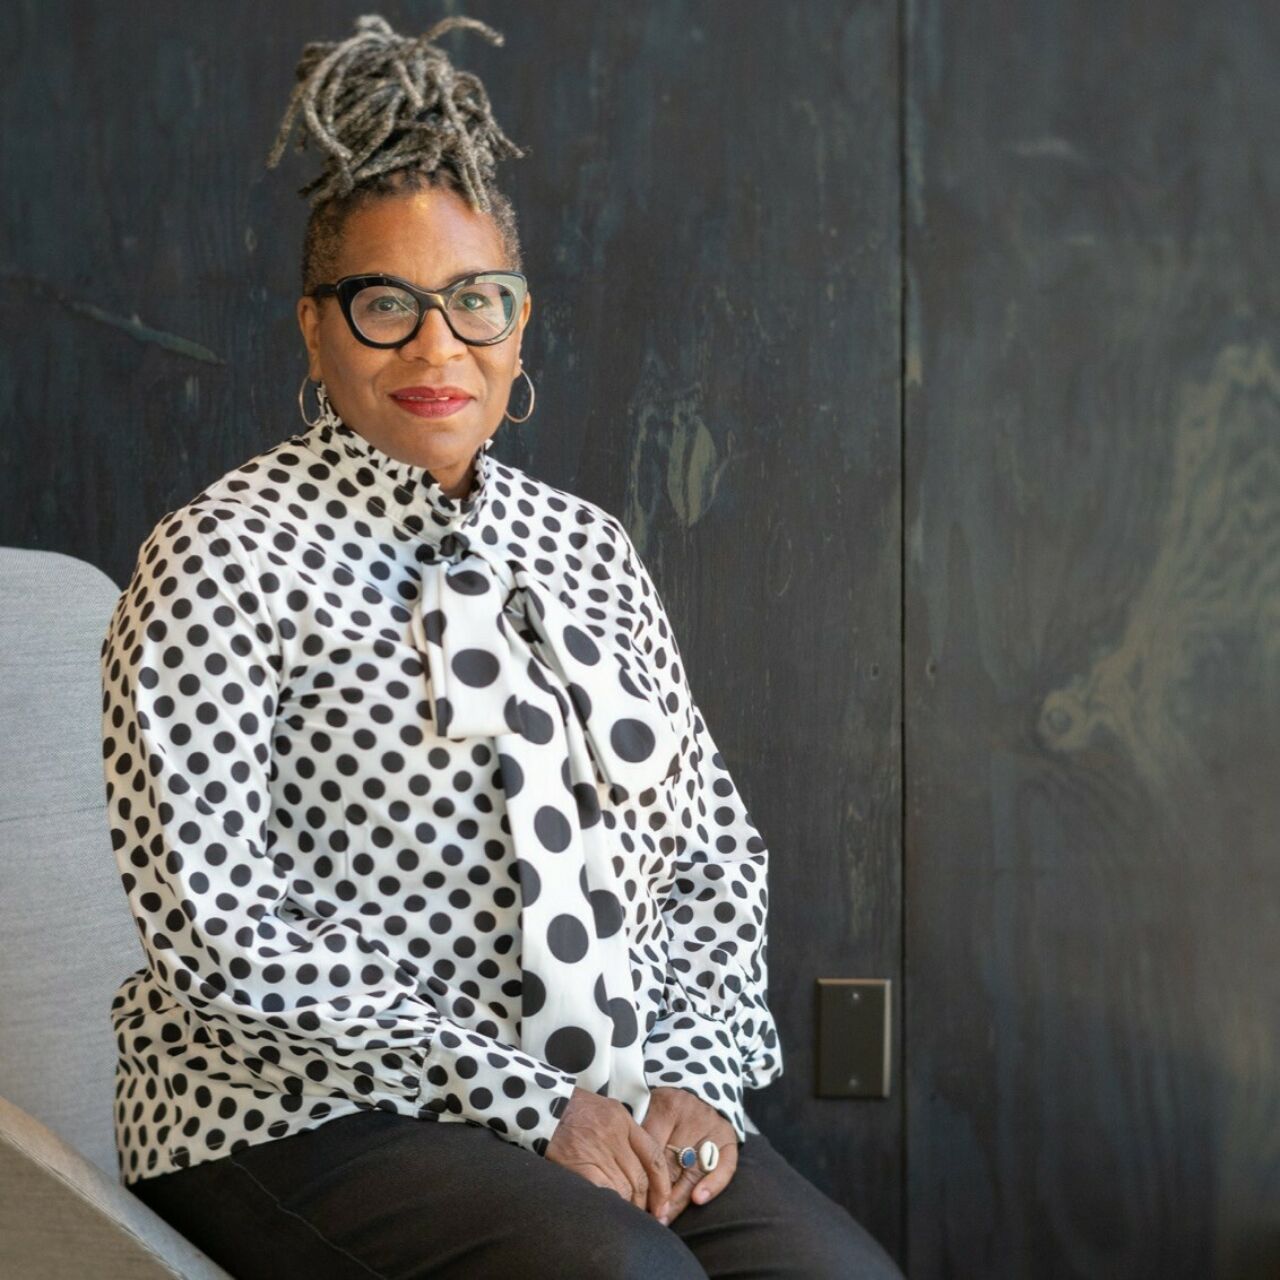 Portrait photo of Folayemi Wilson, a black woman with glasses wearing a white short with black polkadots, sitting in a modern, light-colored chair in front of a dark grey wall.